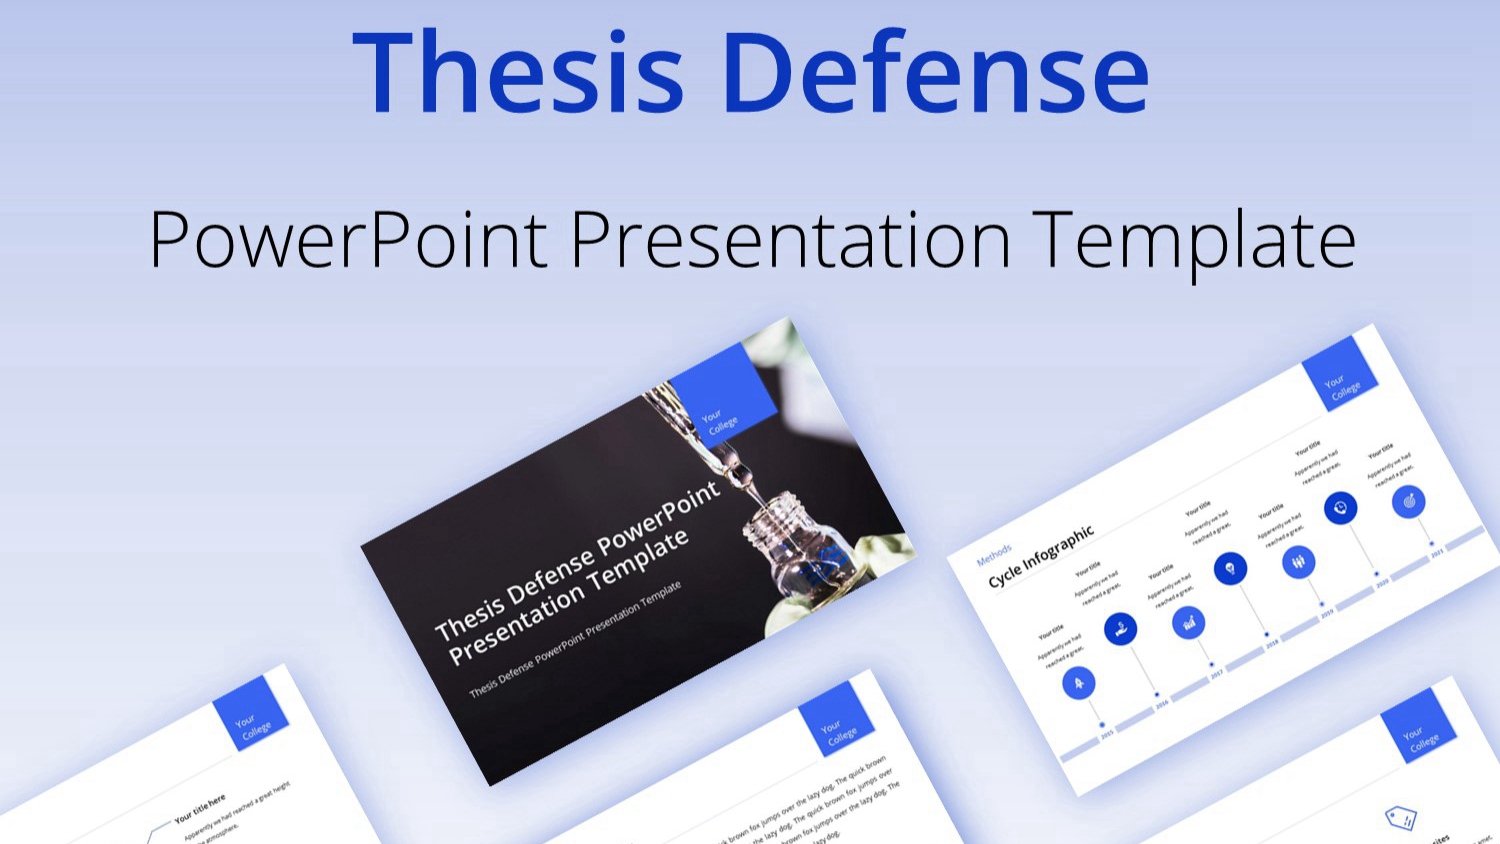 Thesis Defense PowerPoint Presentation Template (21 Slides) - Just Regarding Powerpoint Templates For Thesis Defense